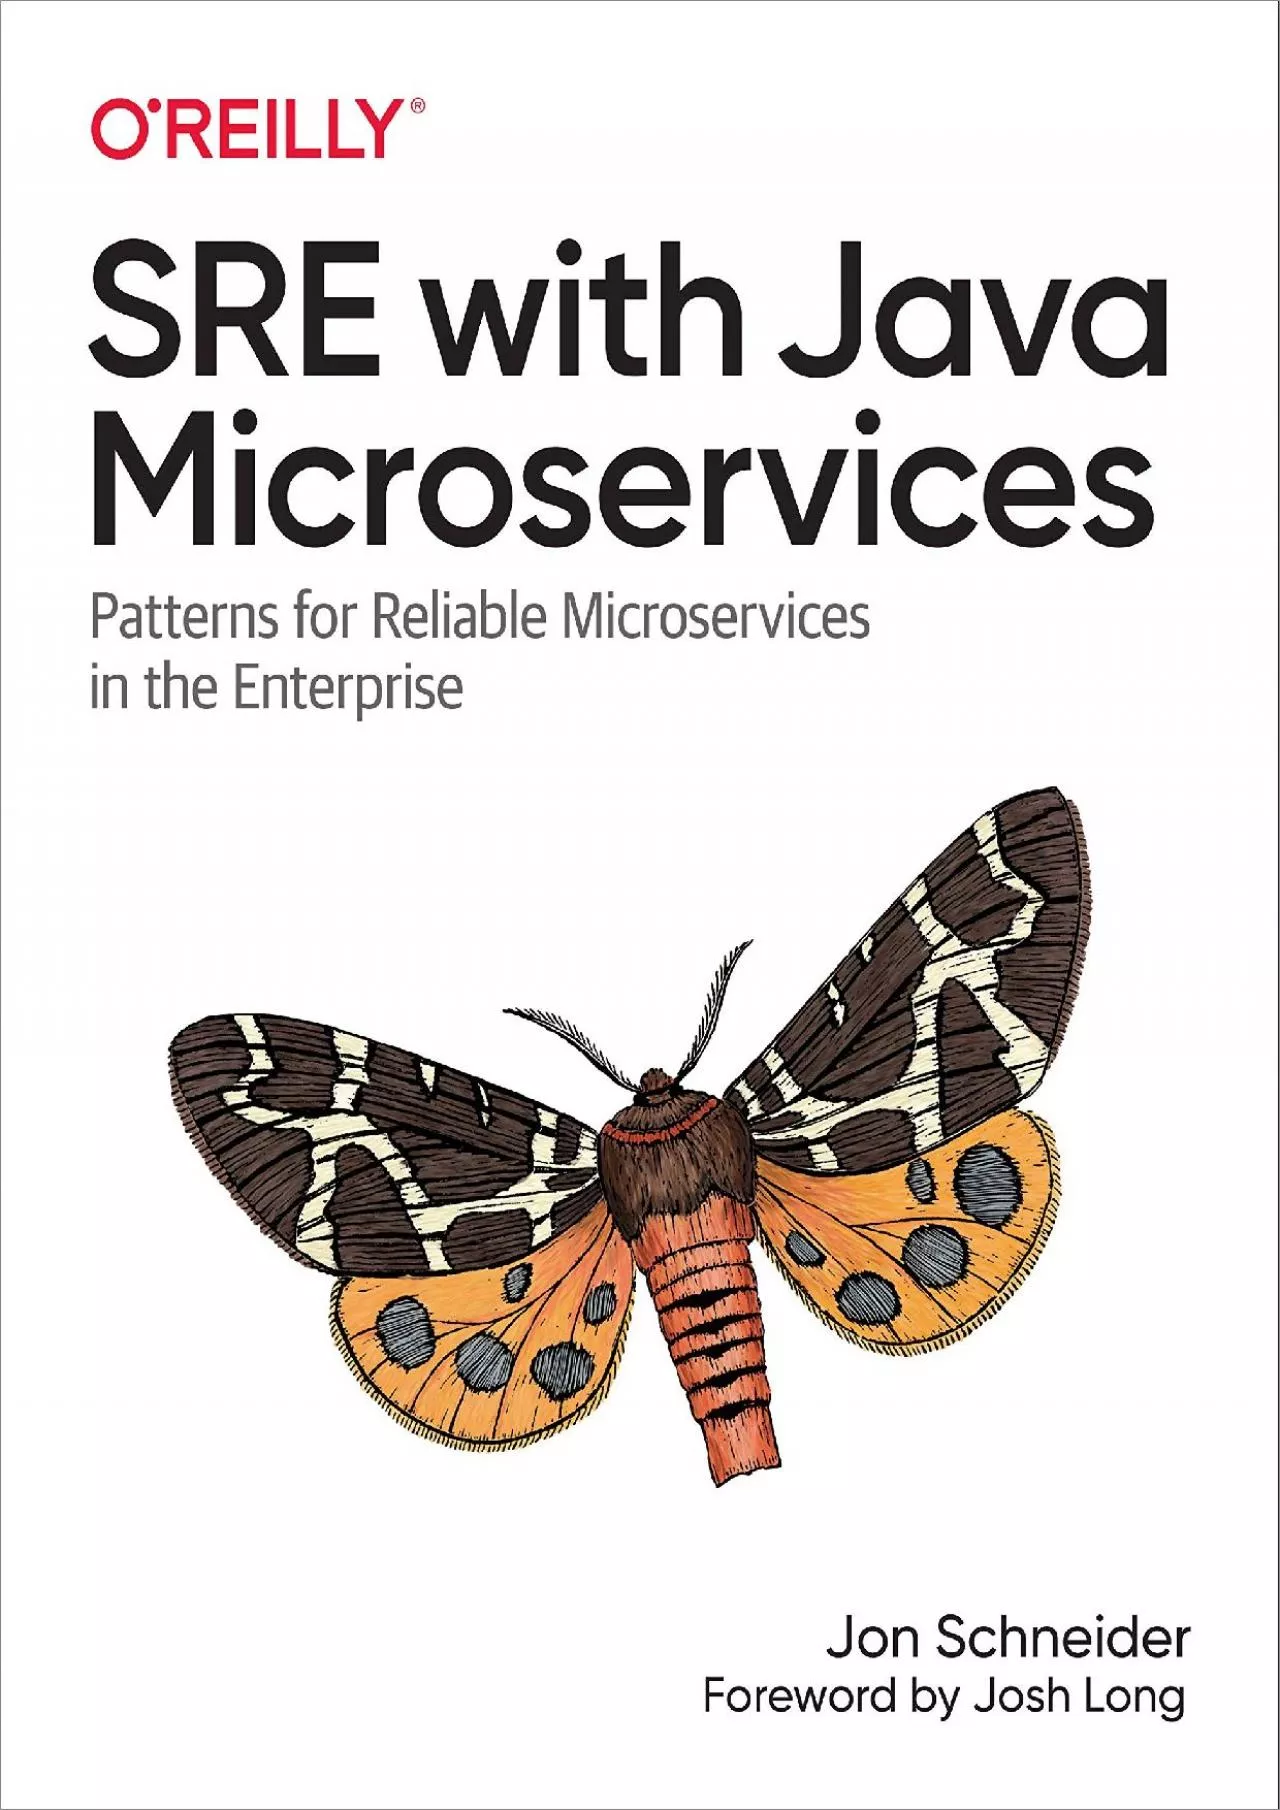 [READING BOOK]-SRE with Java Microservices: Patterns for Reliable Microservices in the